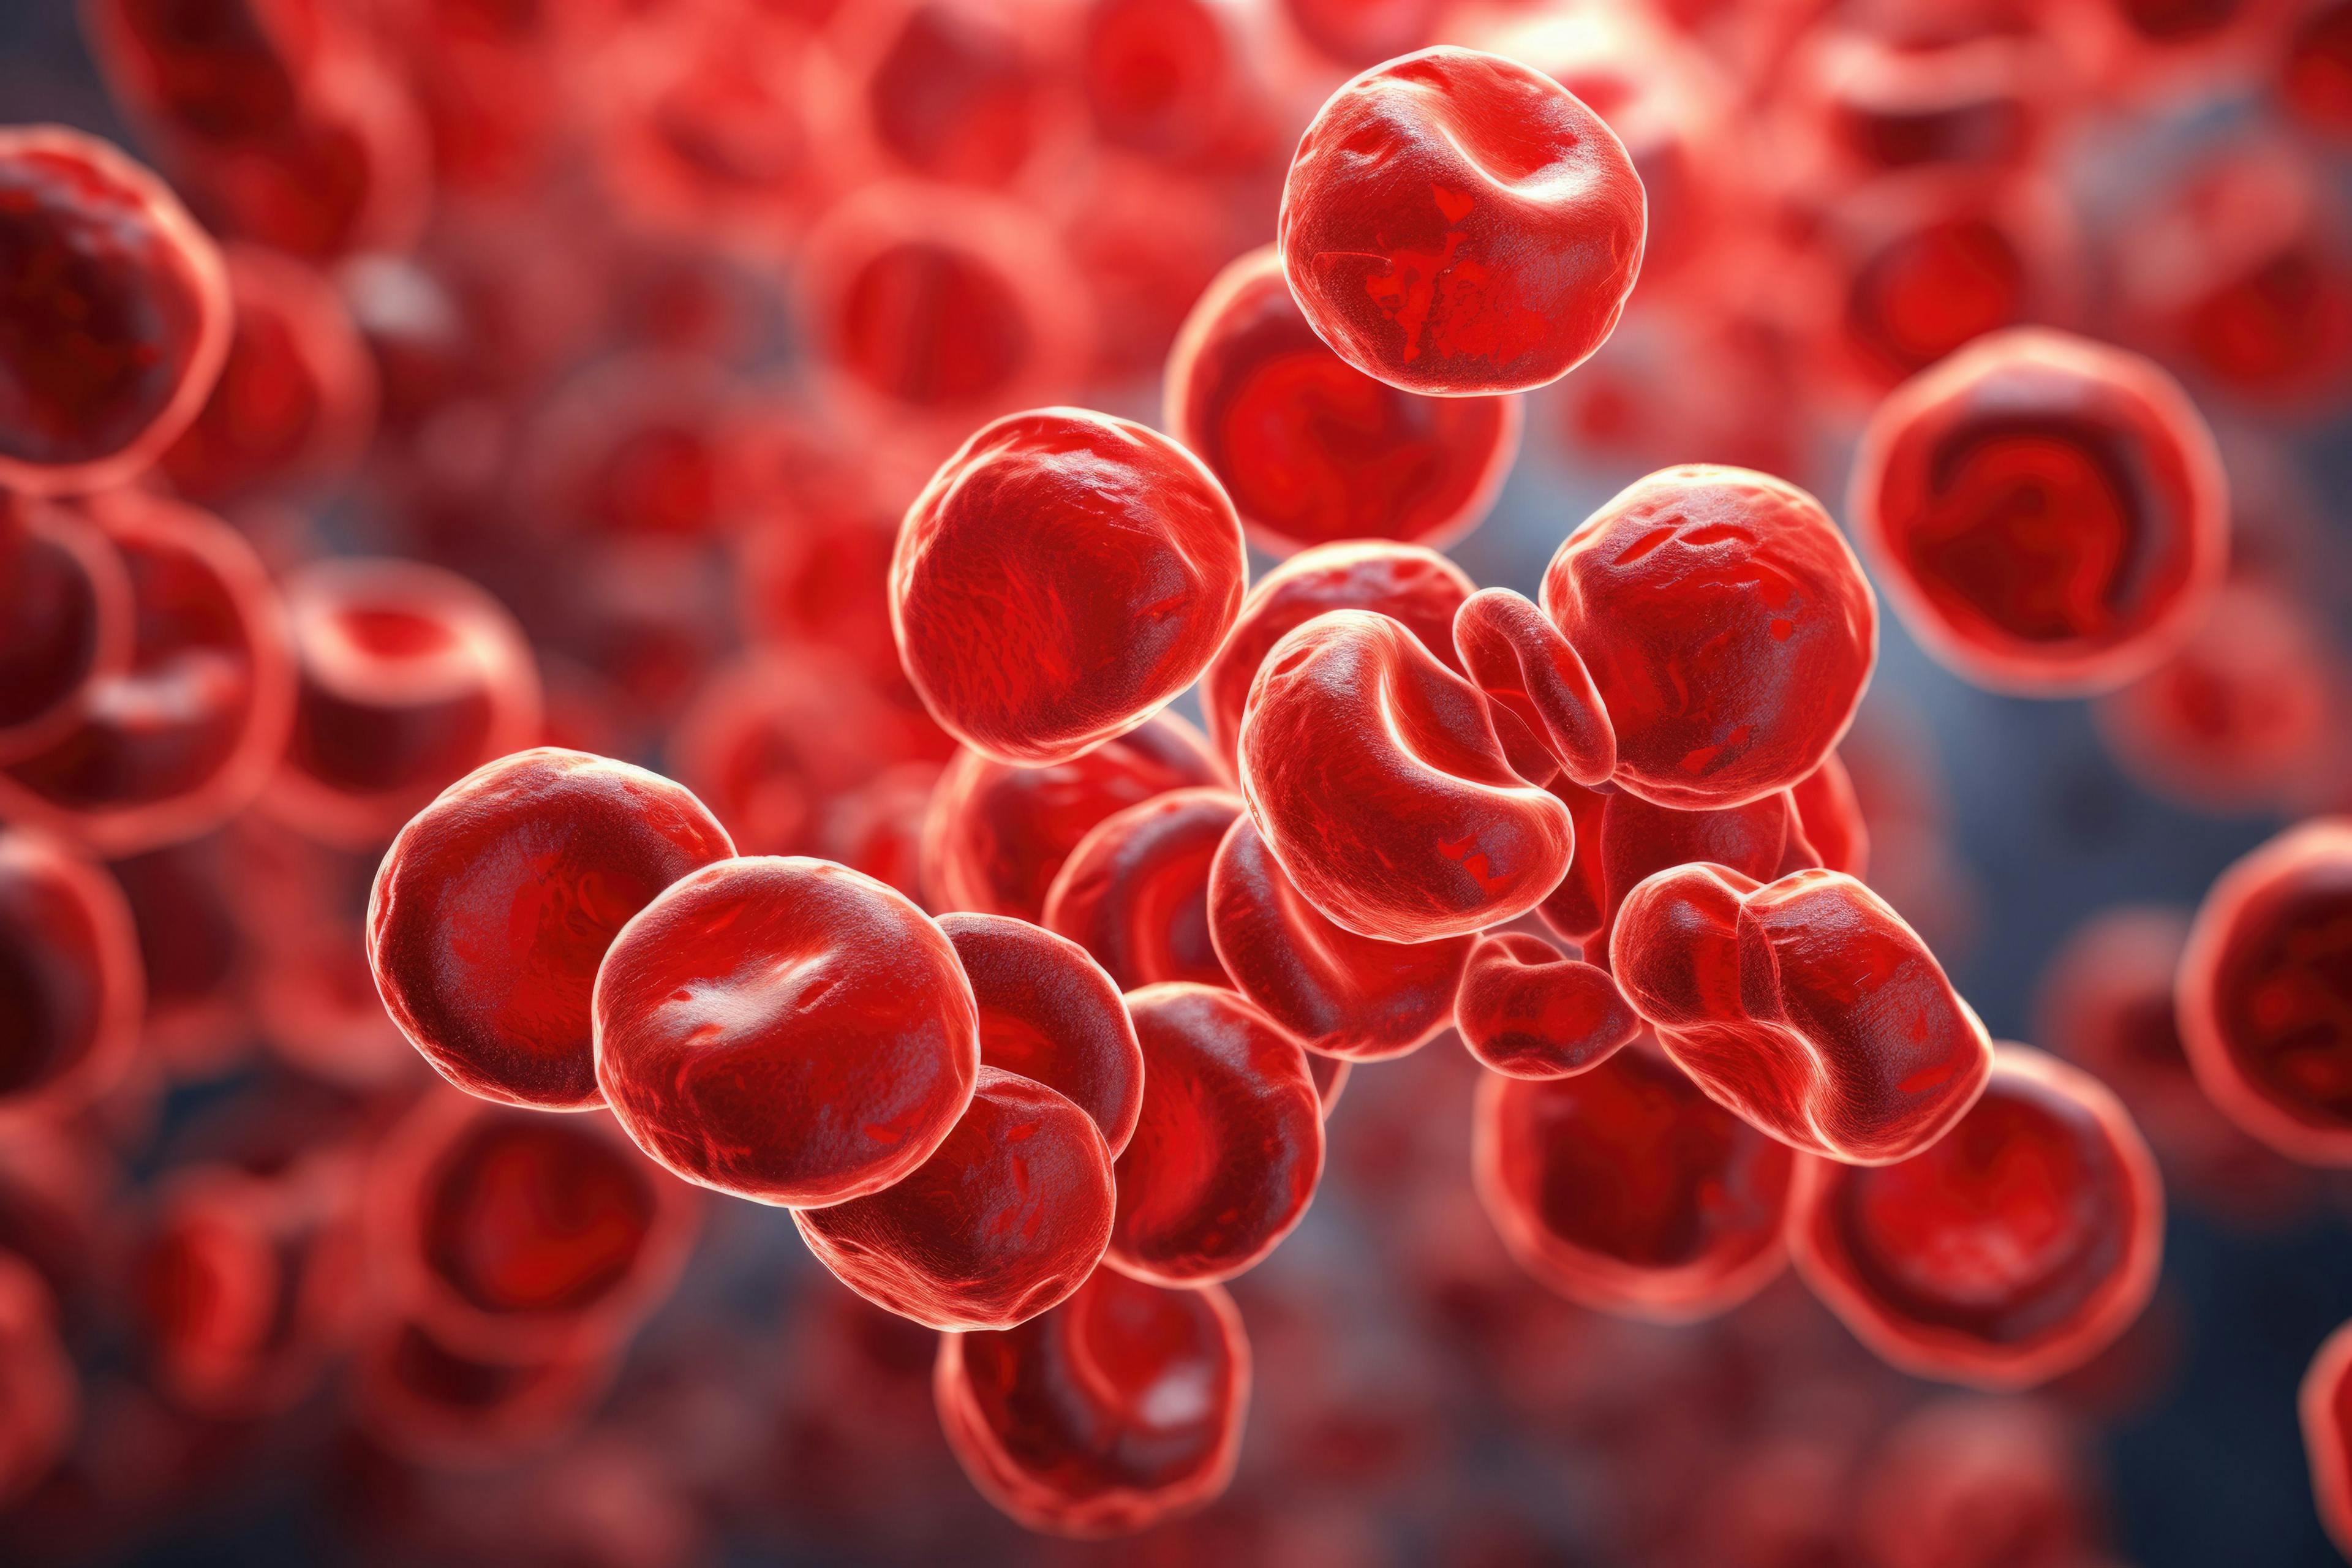 Blood cancer cells under the microscope: © stock_acc - stock.adobe.com